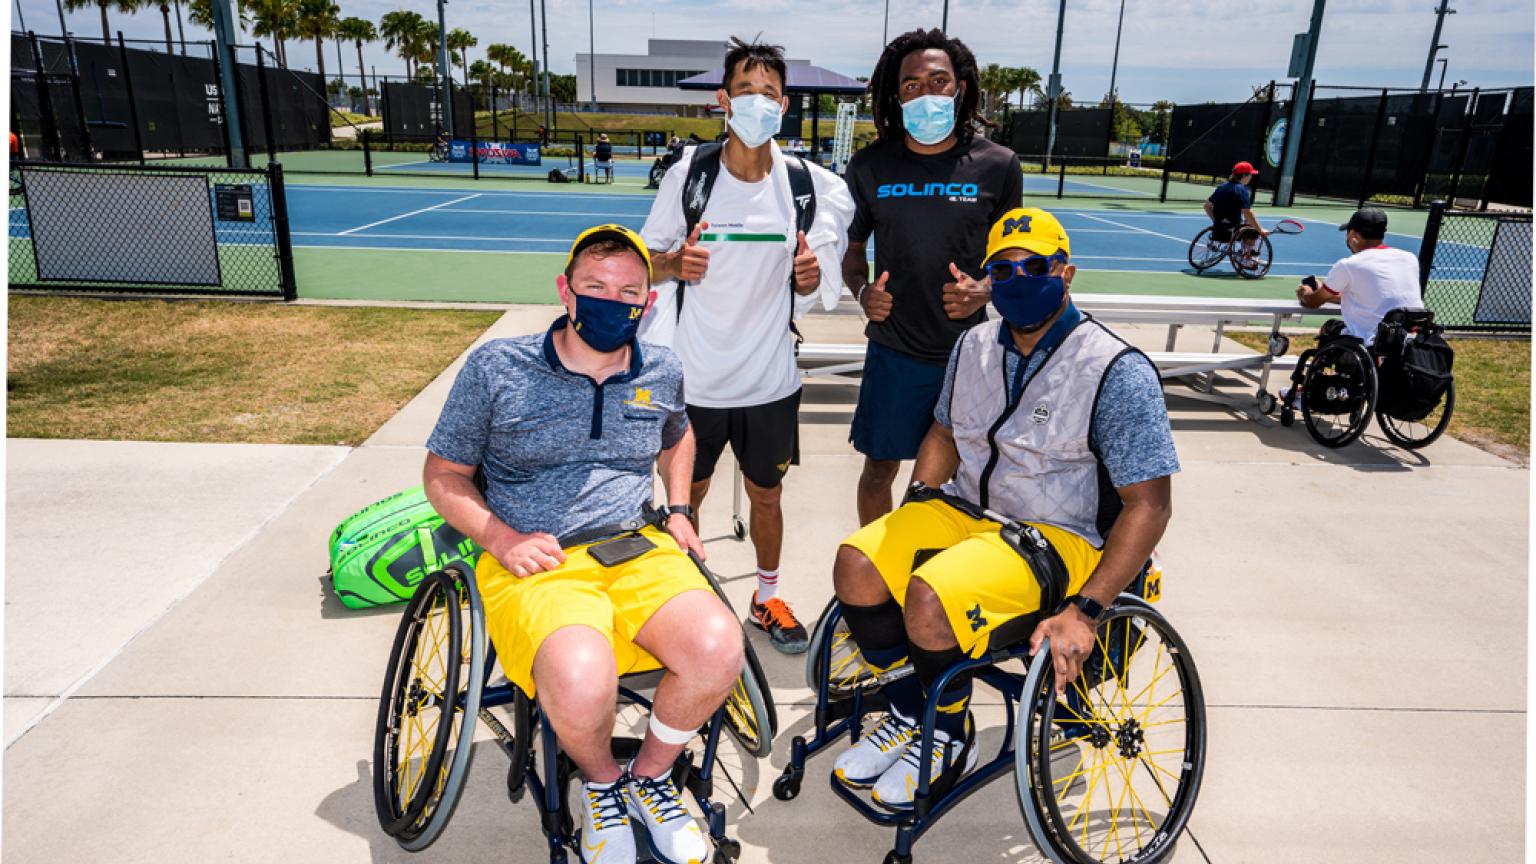 Two University of Michigan tennis players posing with two professional tennis players. 